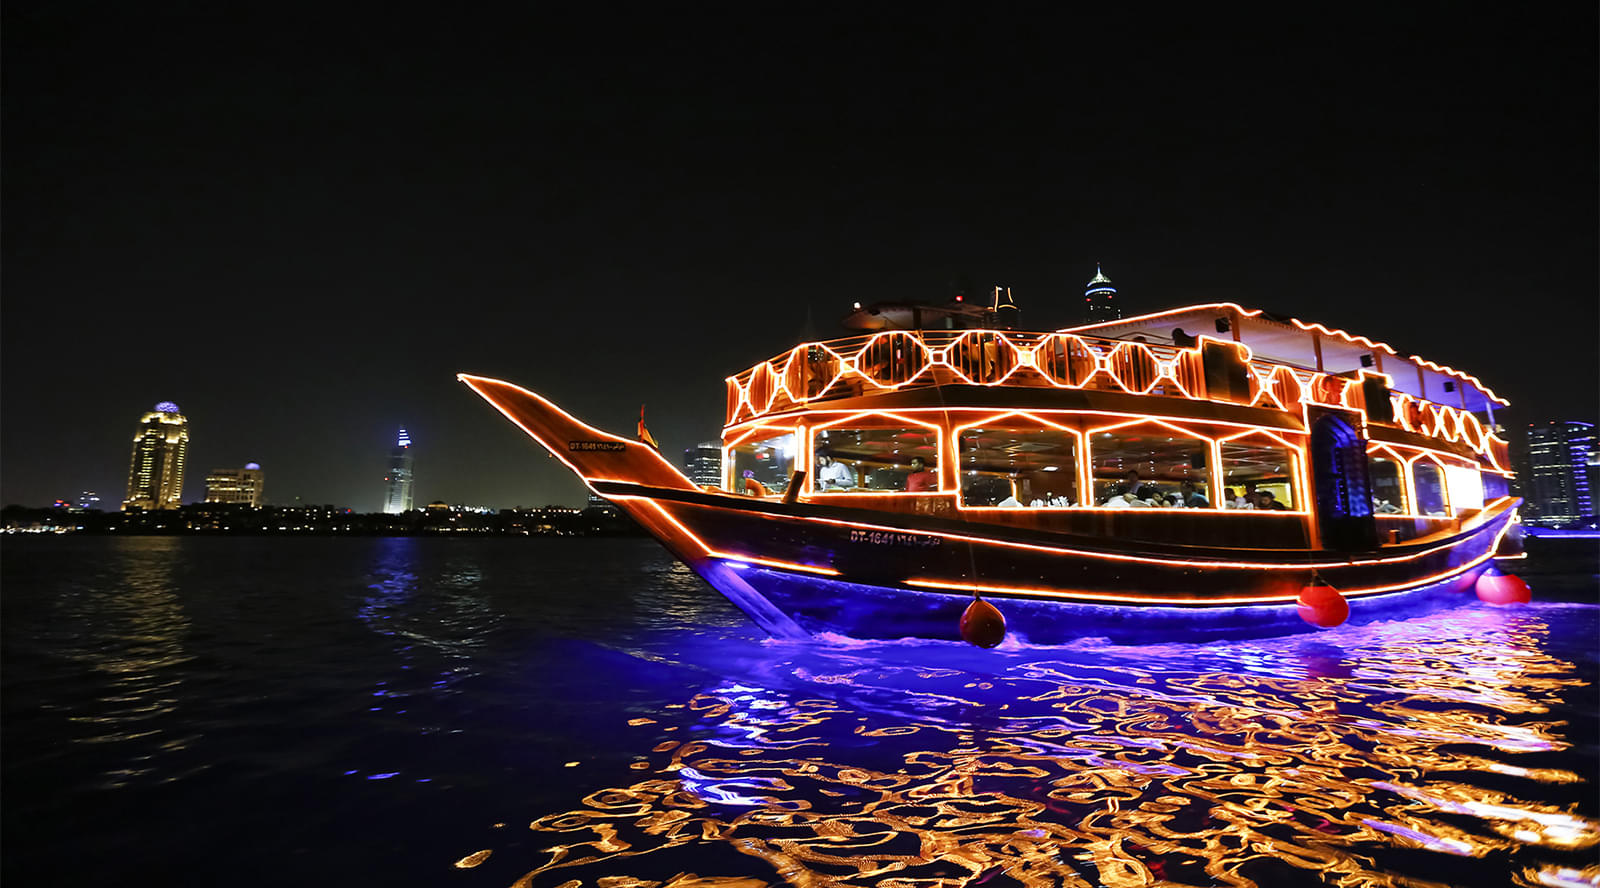 Cruise decorated with lights